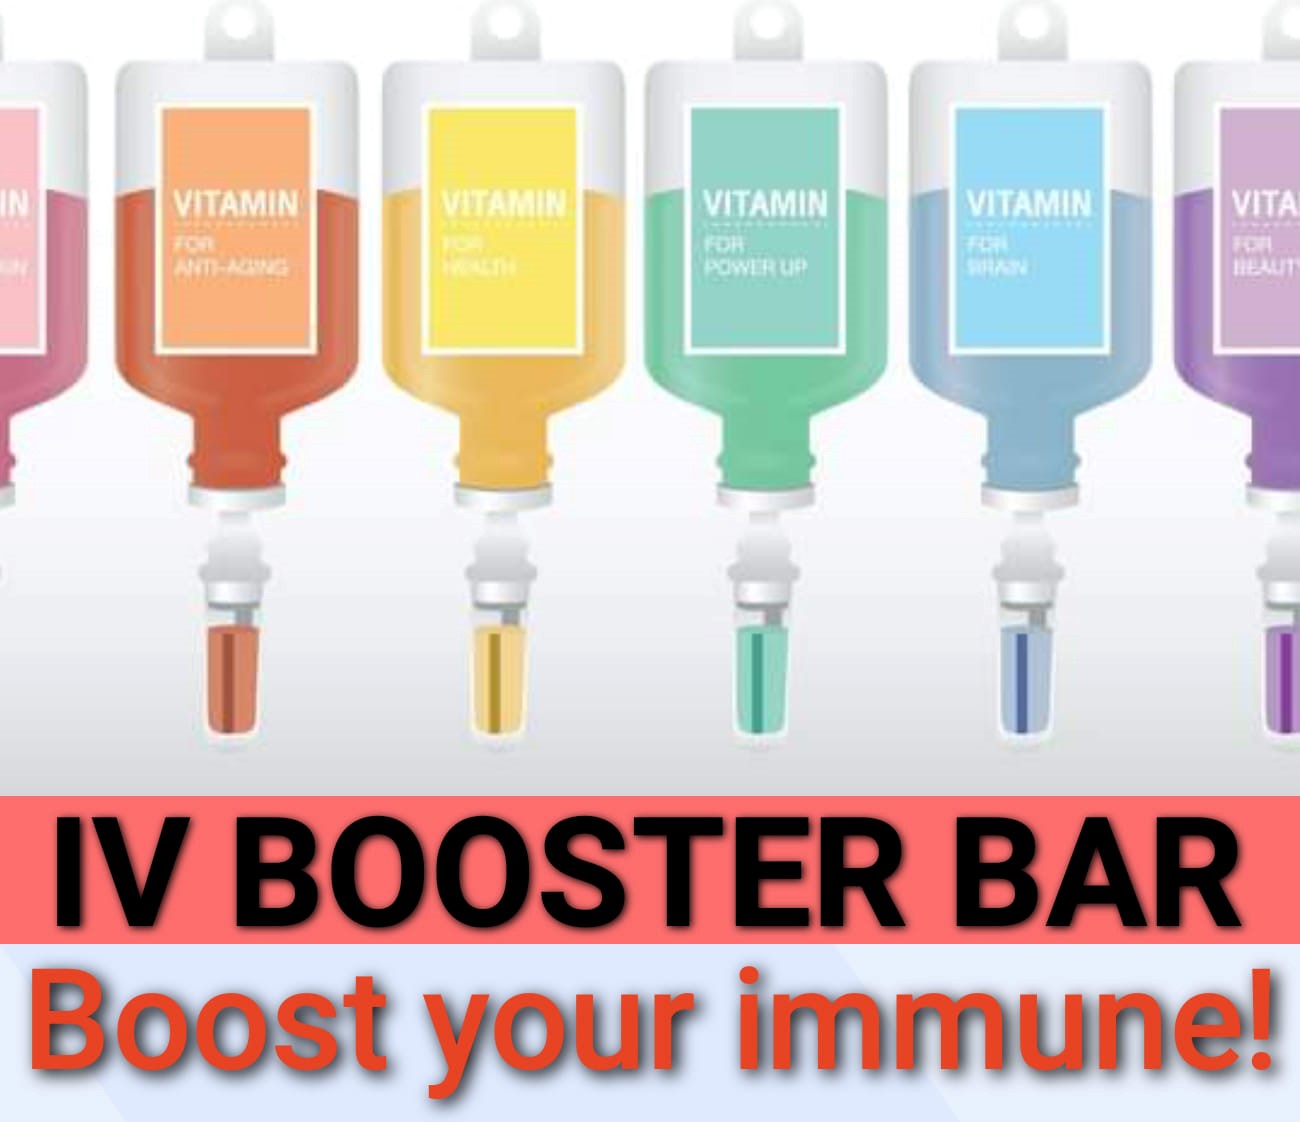 IV Booster Bar and Medical Centre 7